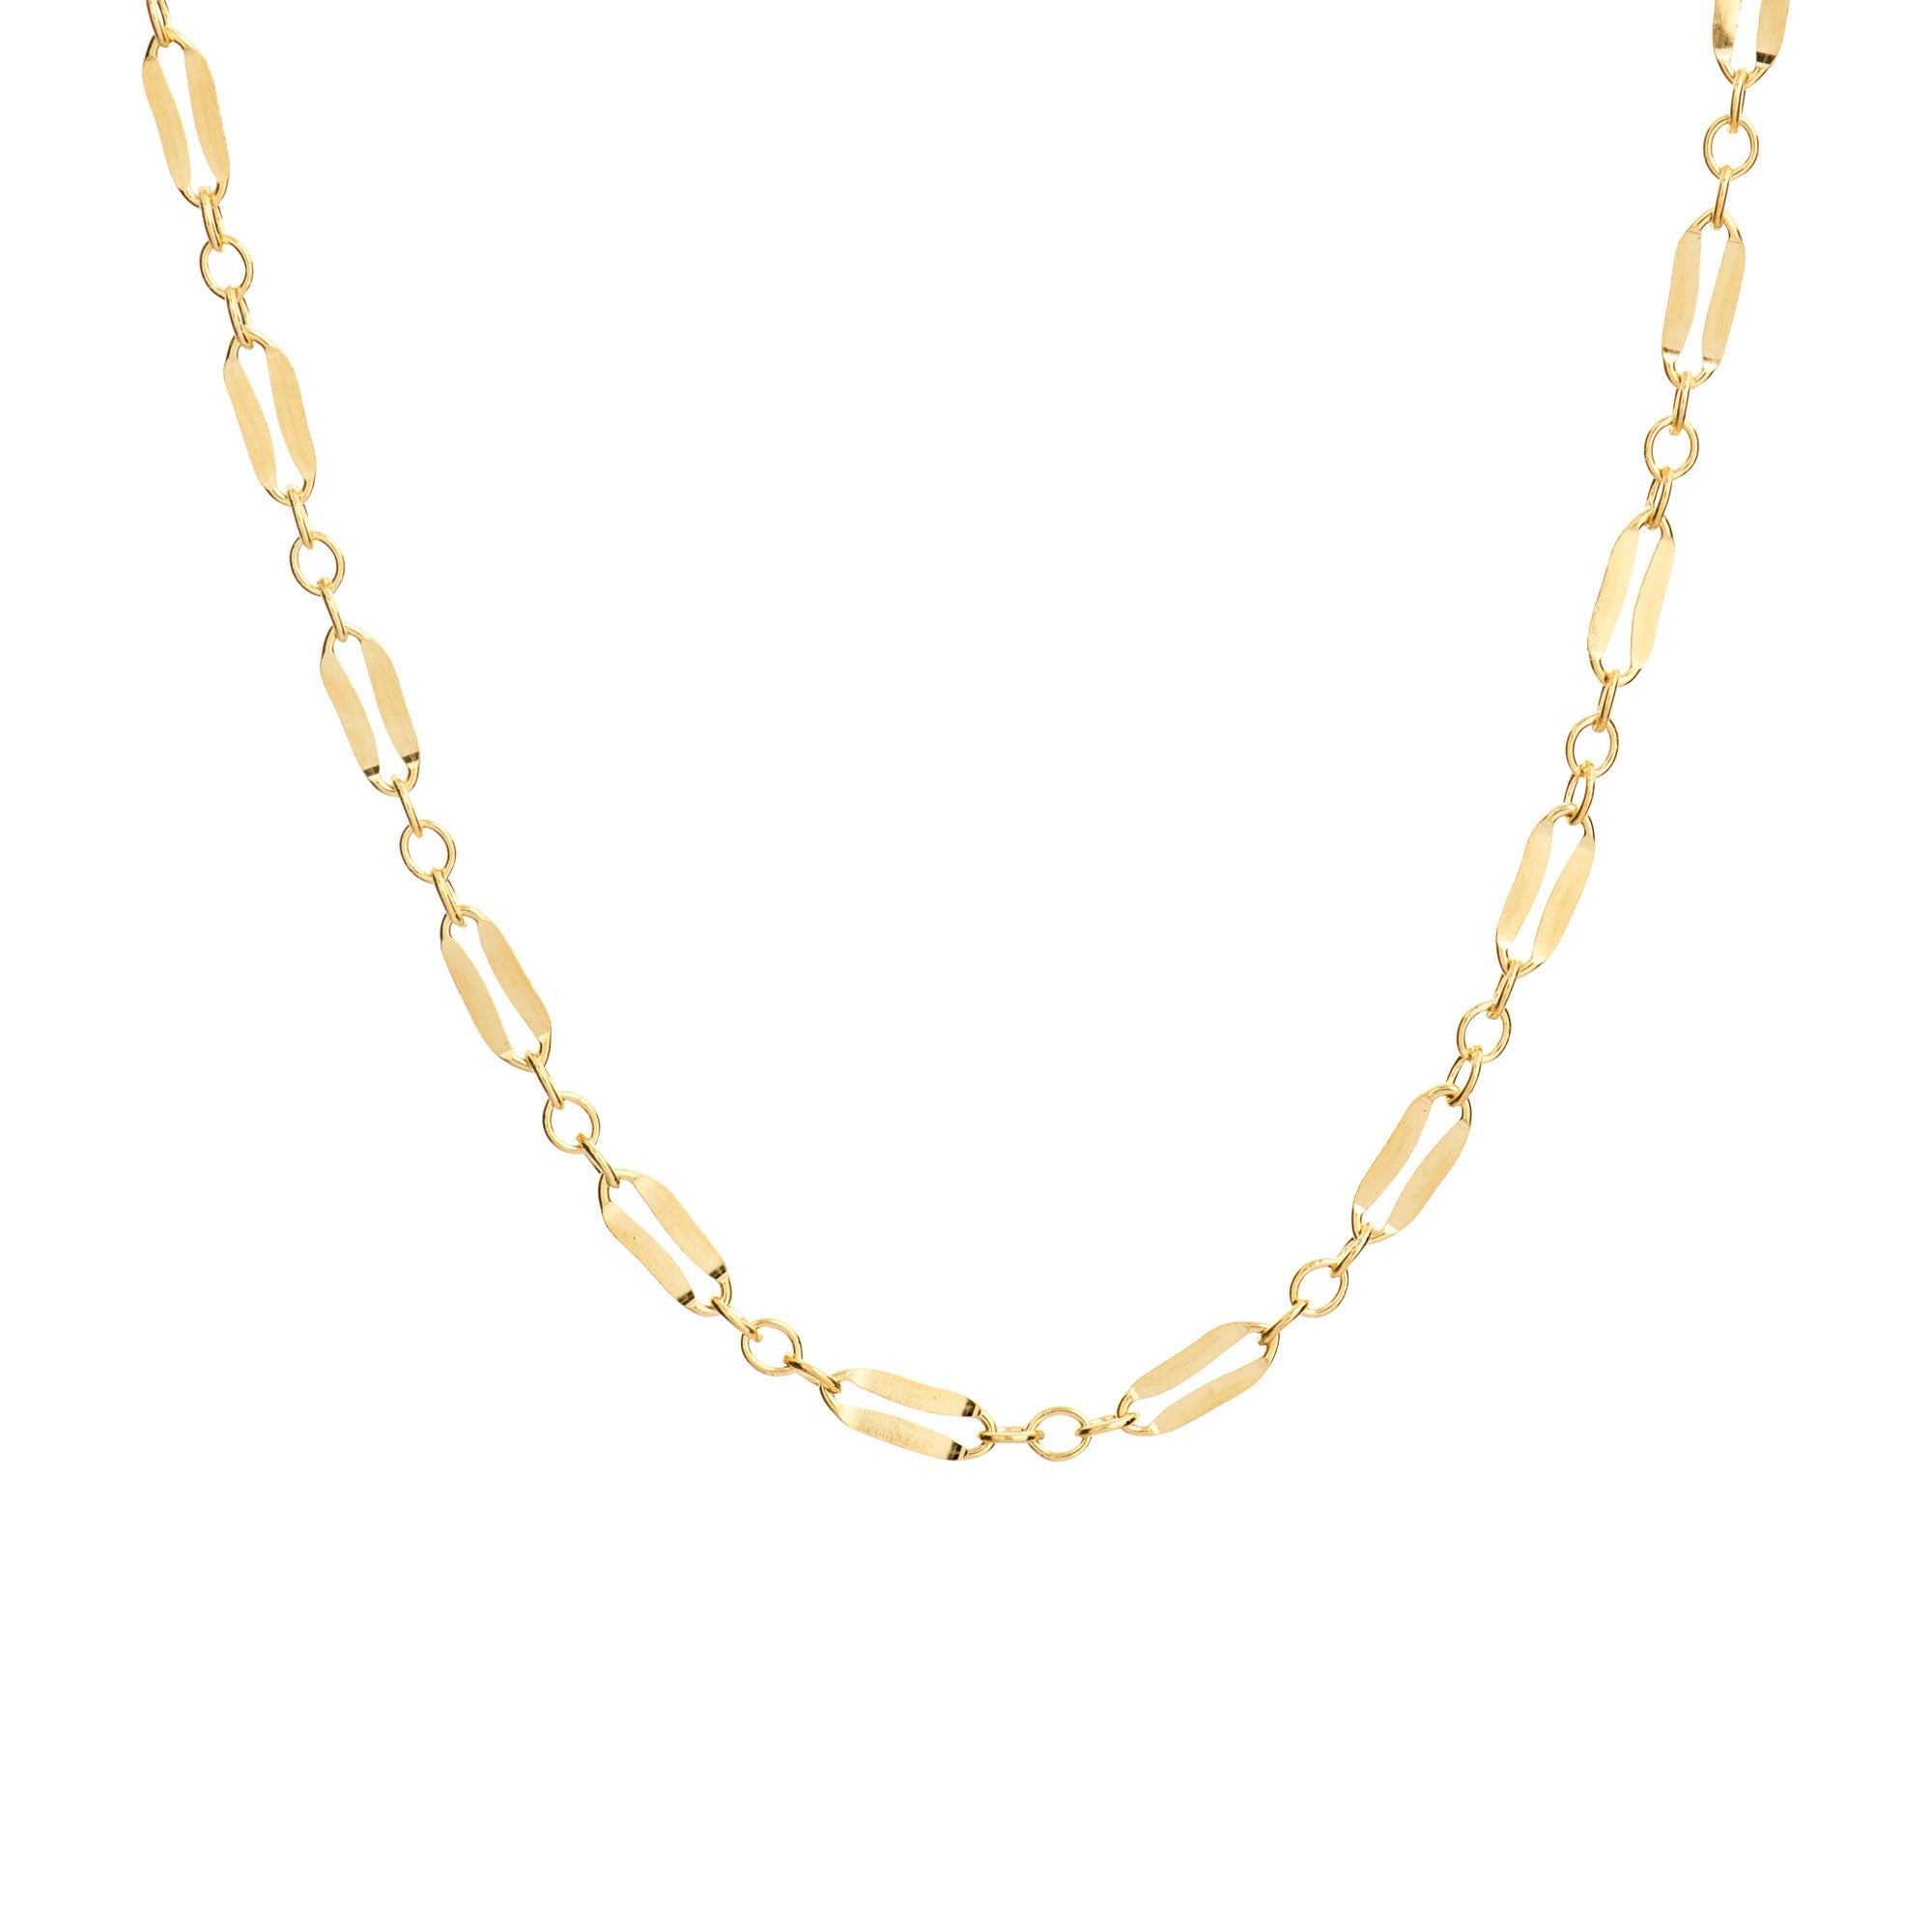 LOLO 20" Delicate Chain 18K Gold Filled Necklace